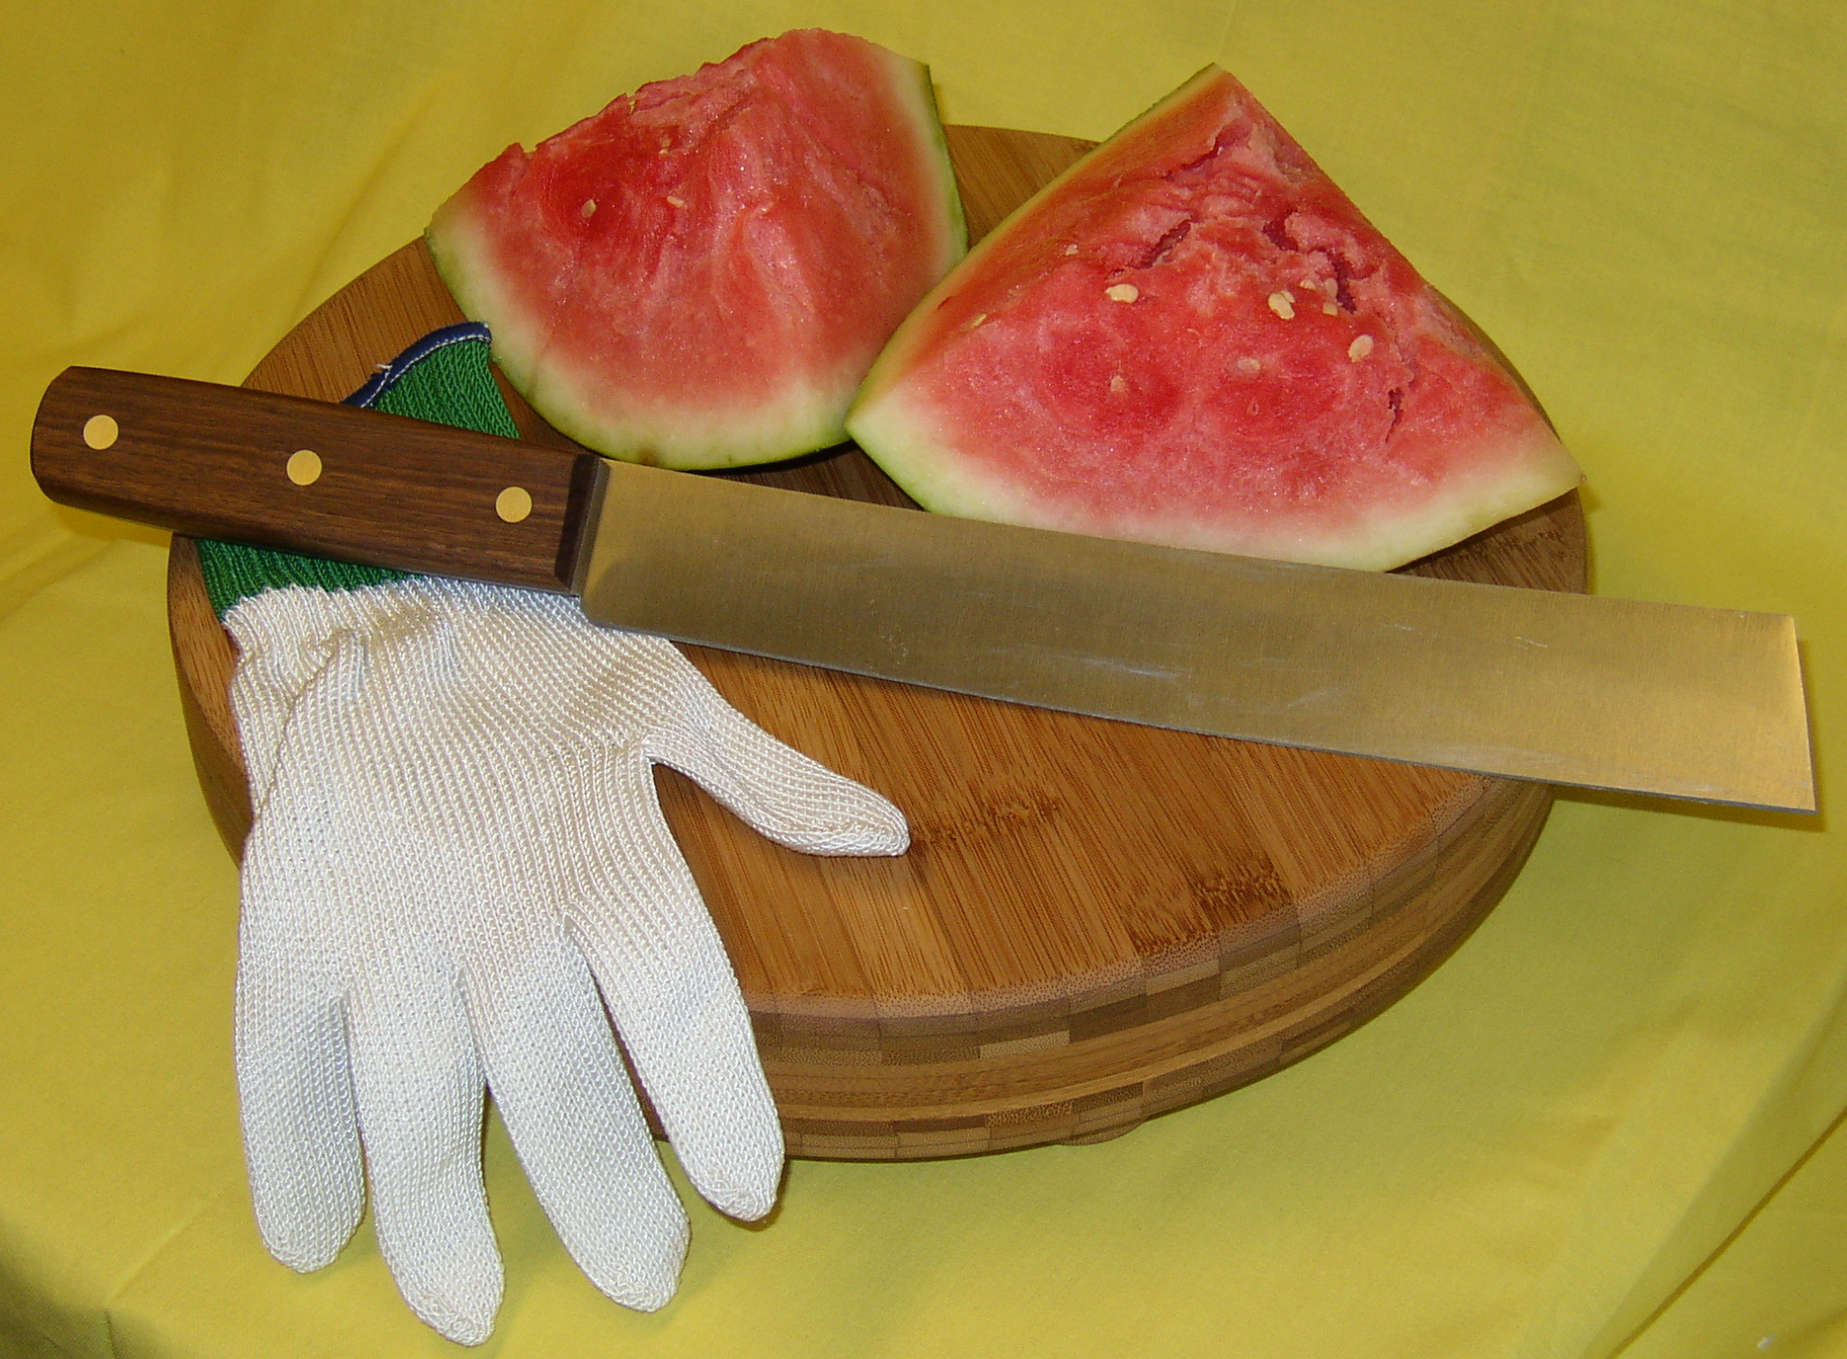 Watermelon knife and protective Kevlar glove